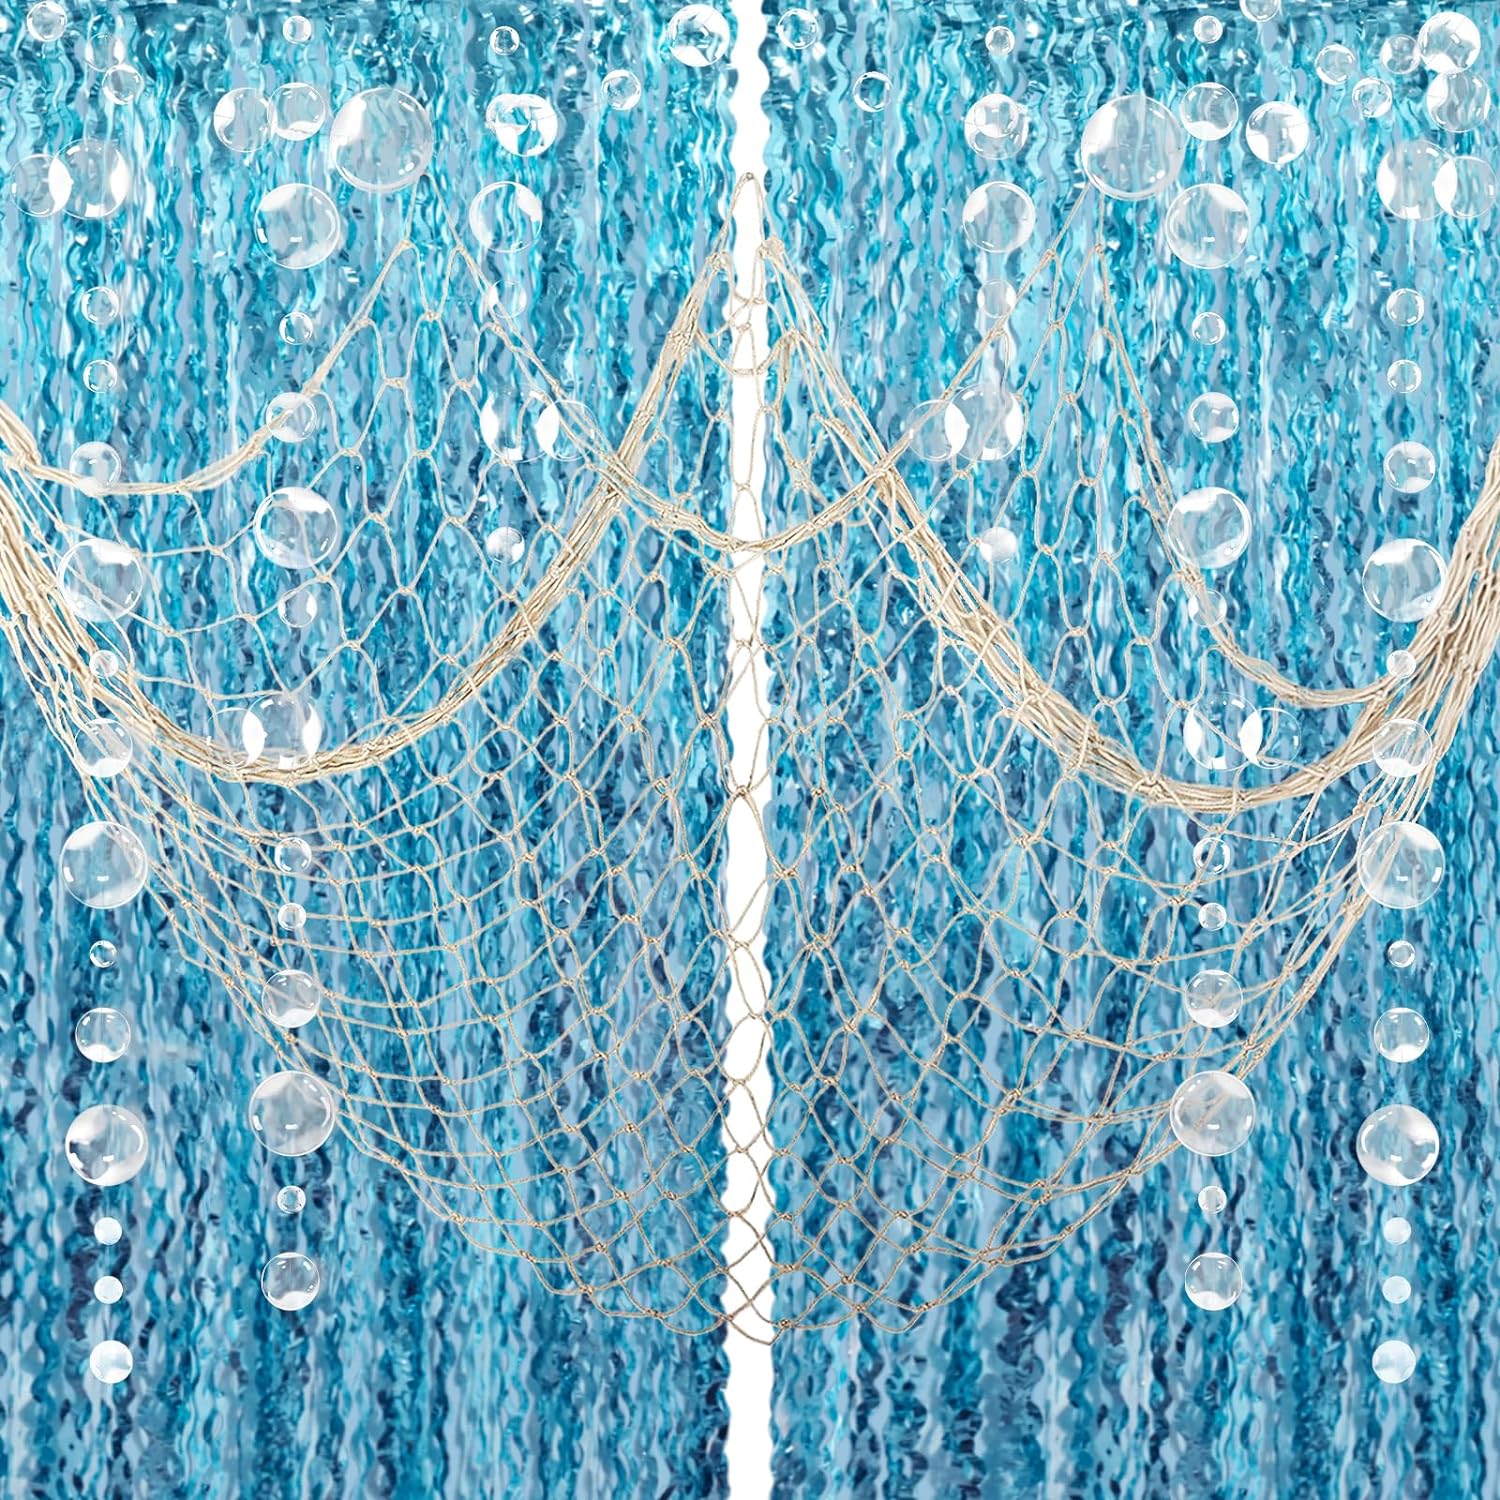 ZERODECO Party Decorations, Natural Fish Net with Fringe Curtain and Bubble Garlands for Nautical Decor Pirate Party Kids Birthday Under The Sea Party Mermaid Decor Room Wall Decor